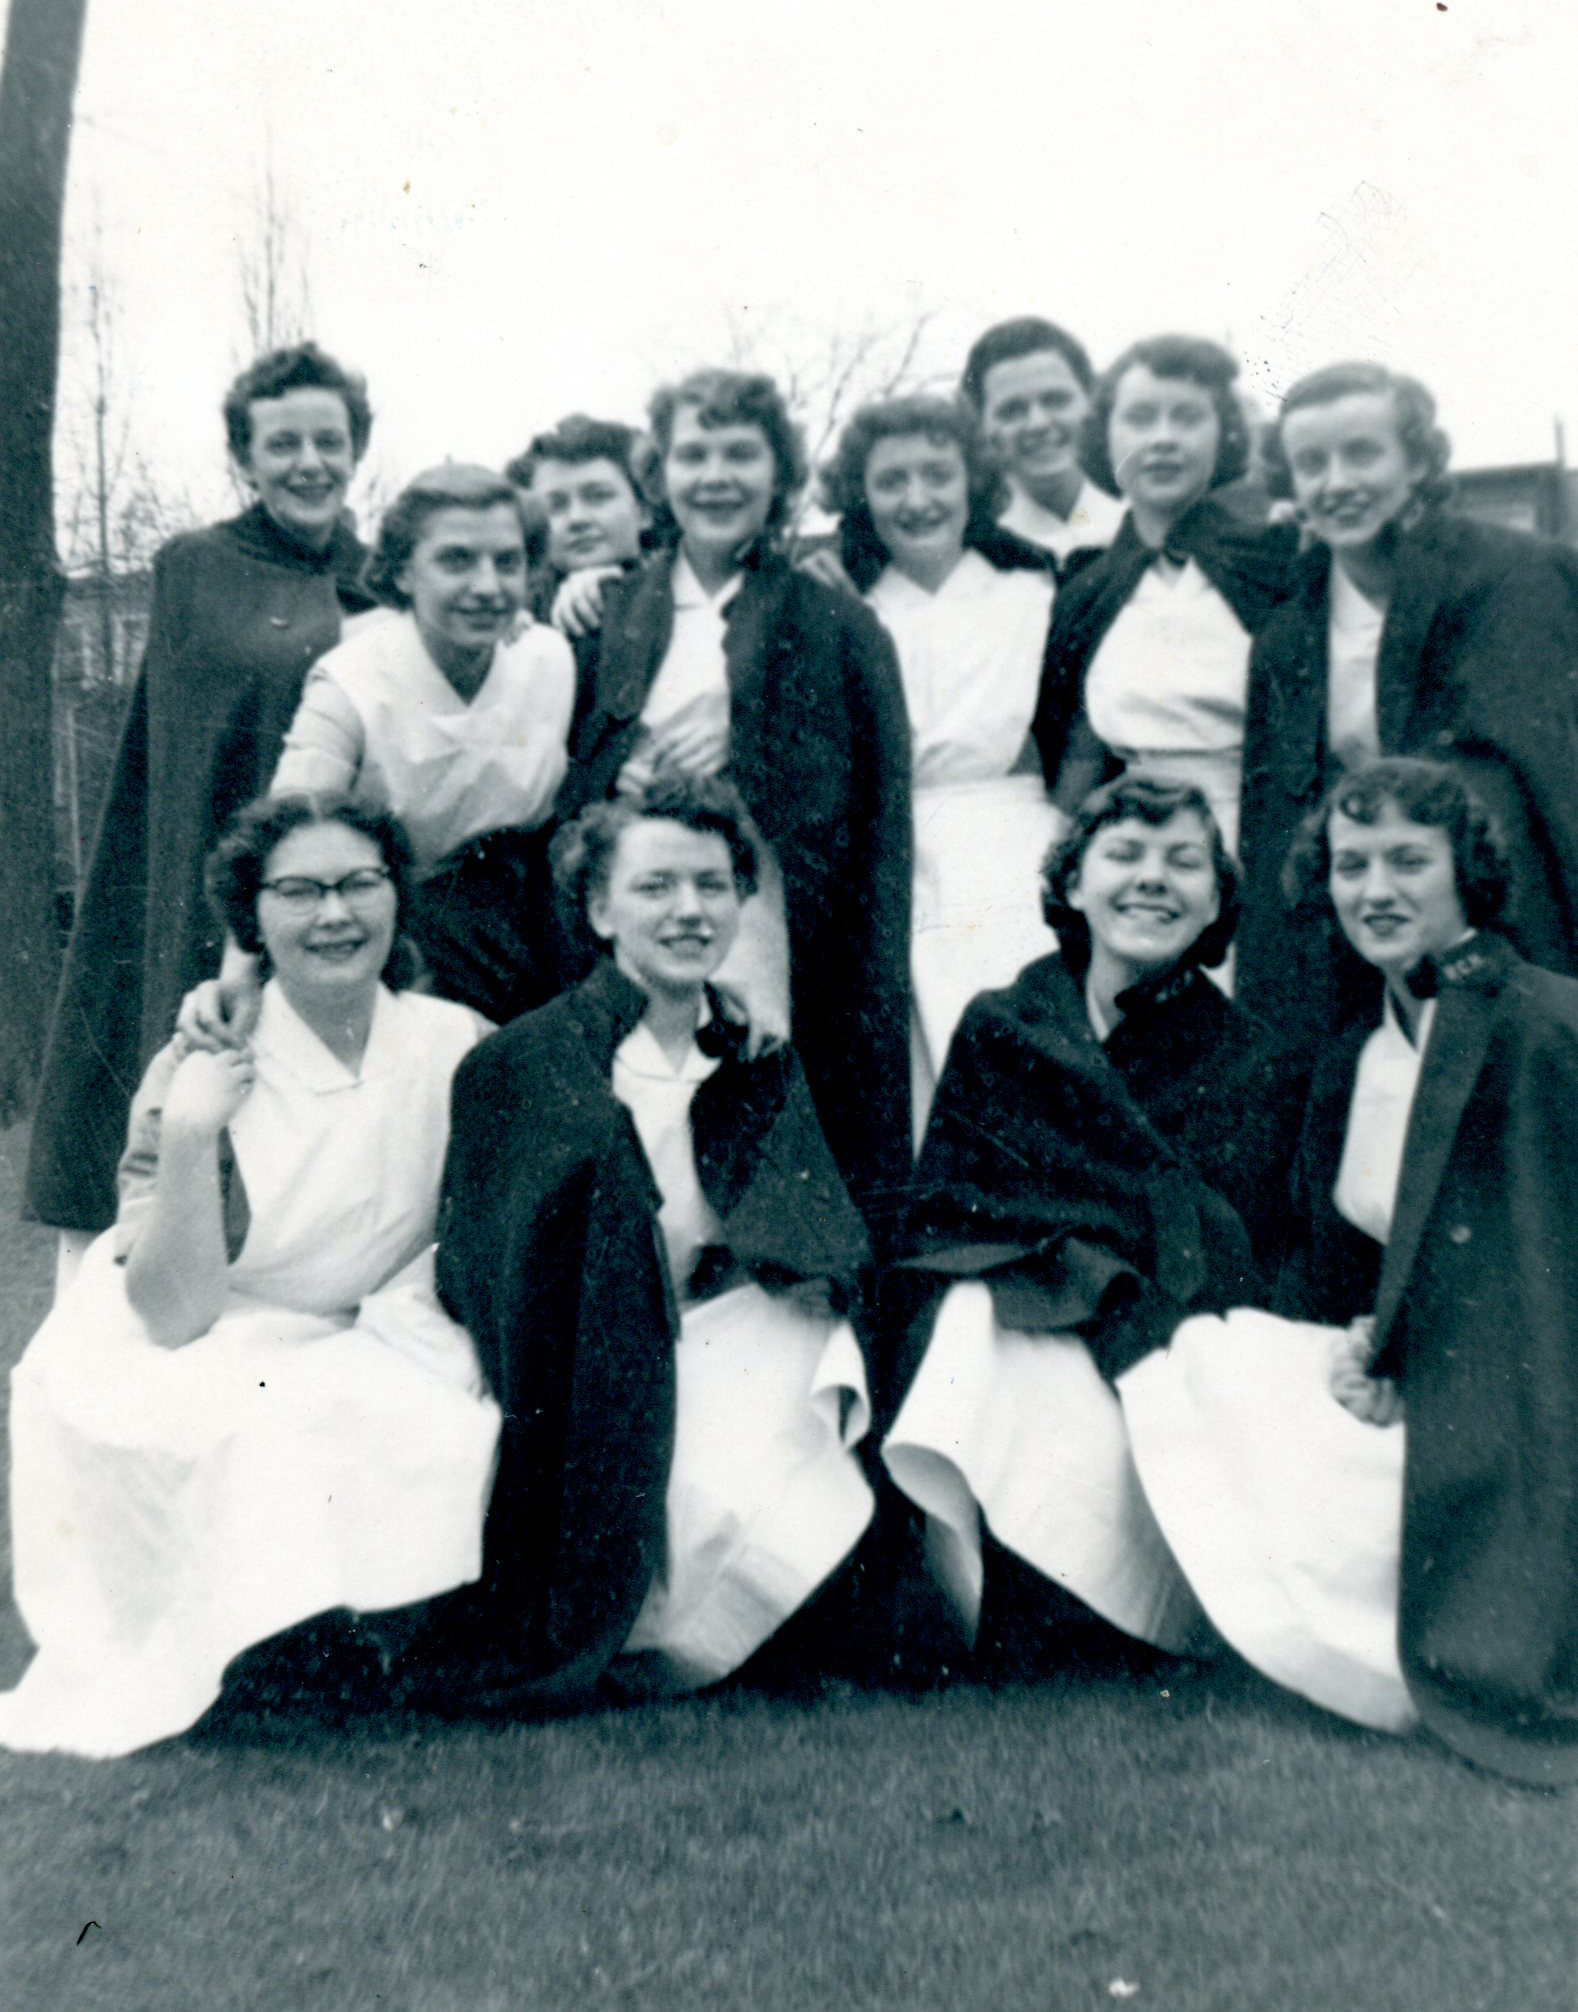 Twelve young women smile as they pose for the camera. They are outside, and most are wearing nurse's capes over their uniforms.